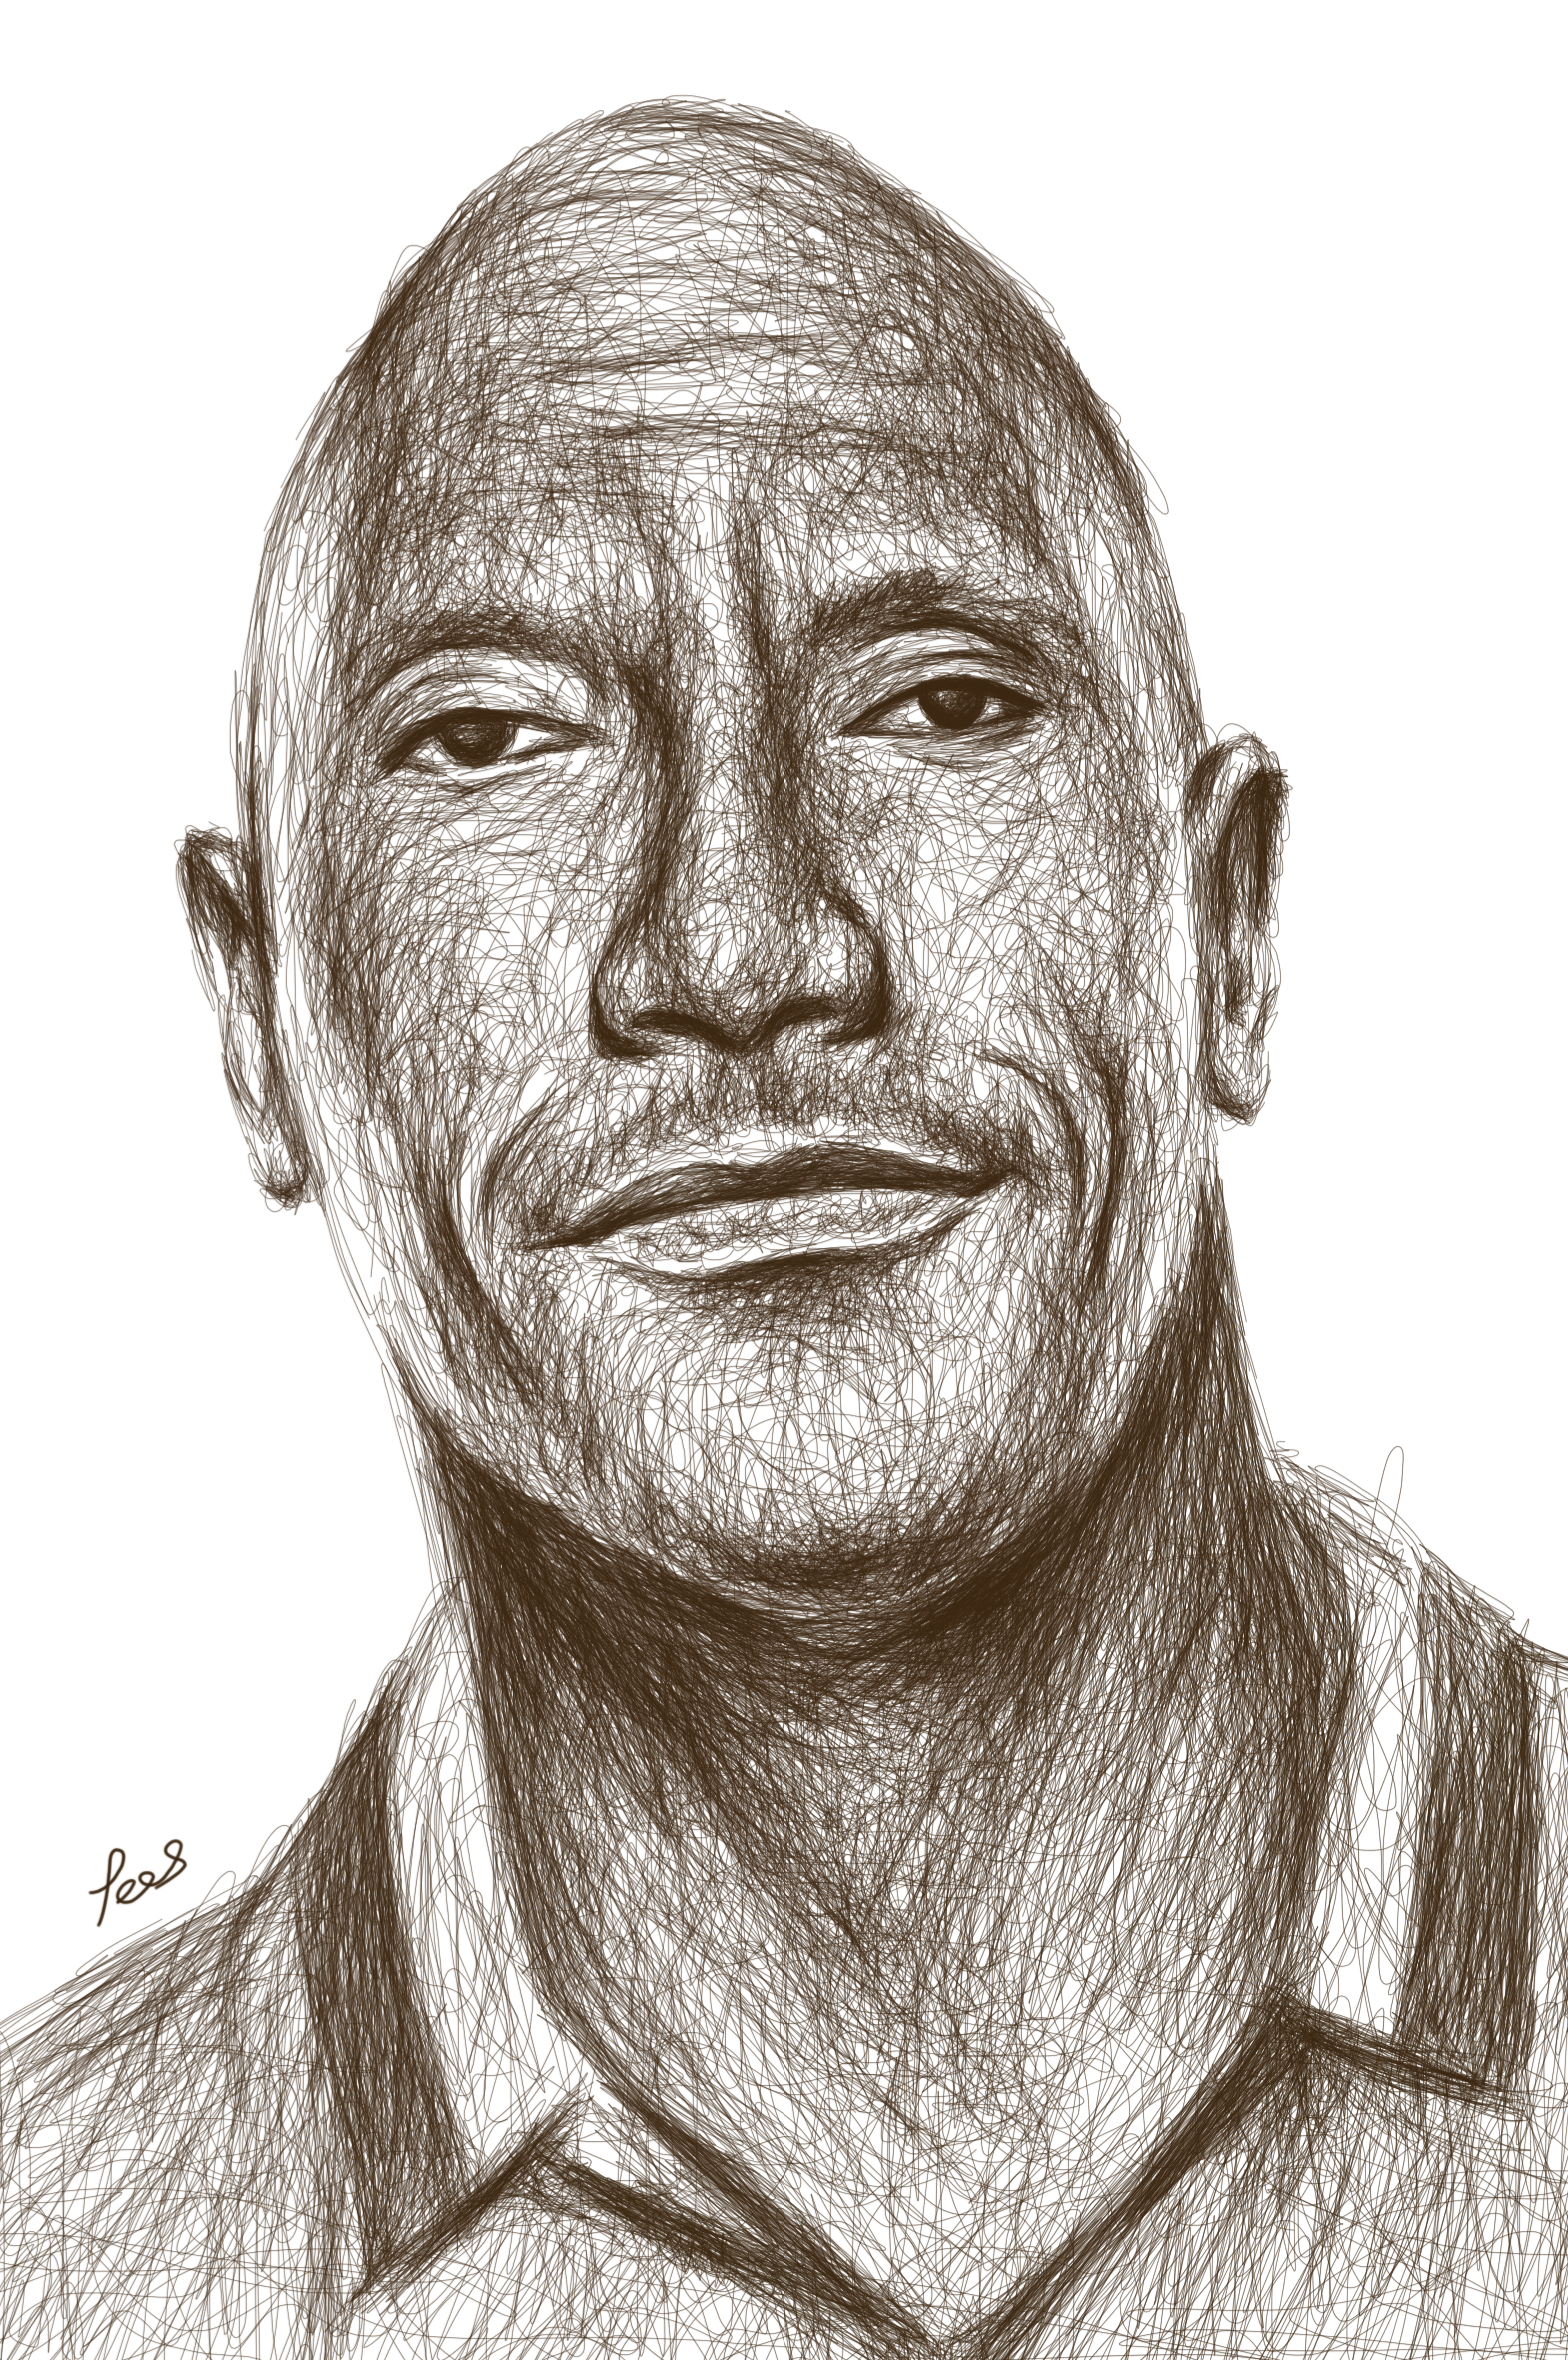 SanilArtist on X Colored pencil drawing of Dwayne Johnson also known as The  Rock TheRock  Check the youtube video of this drawing at  httpstco0nldWjWExR  TheRock dwaynejohnson skyscrapper  WrestleMania wrestling HollywoodLife 